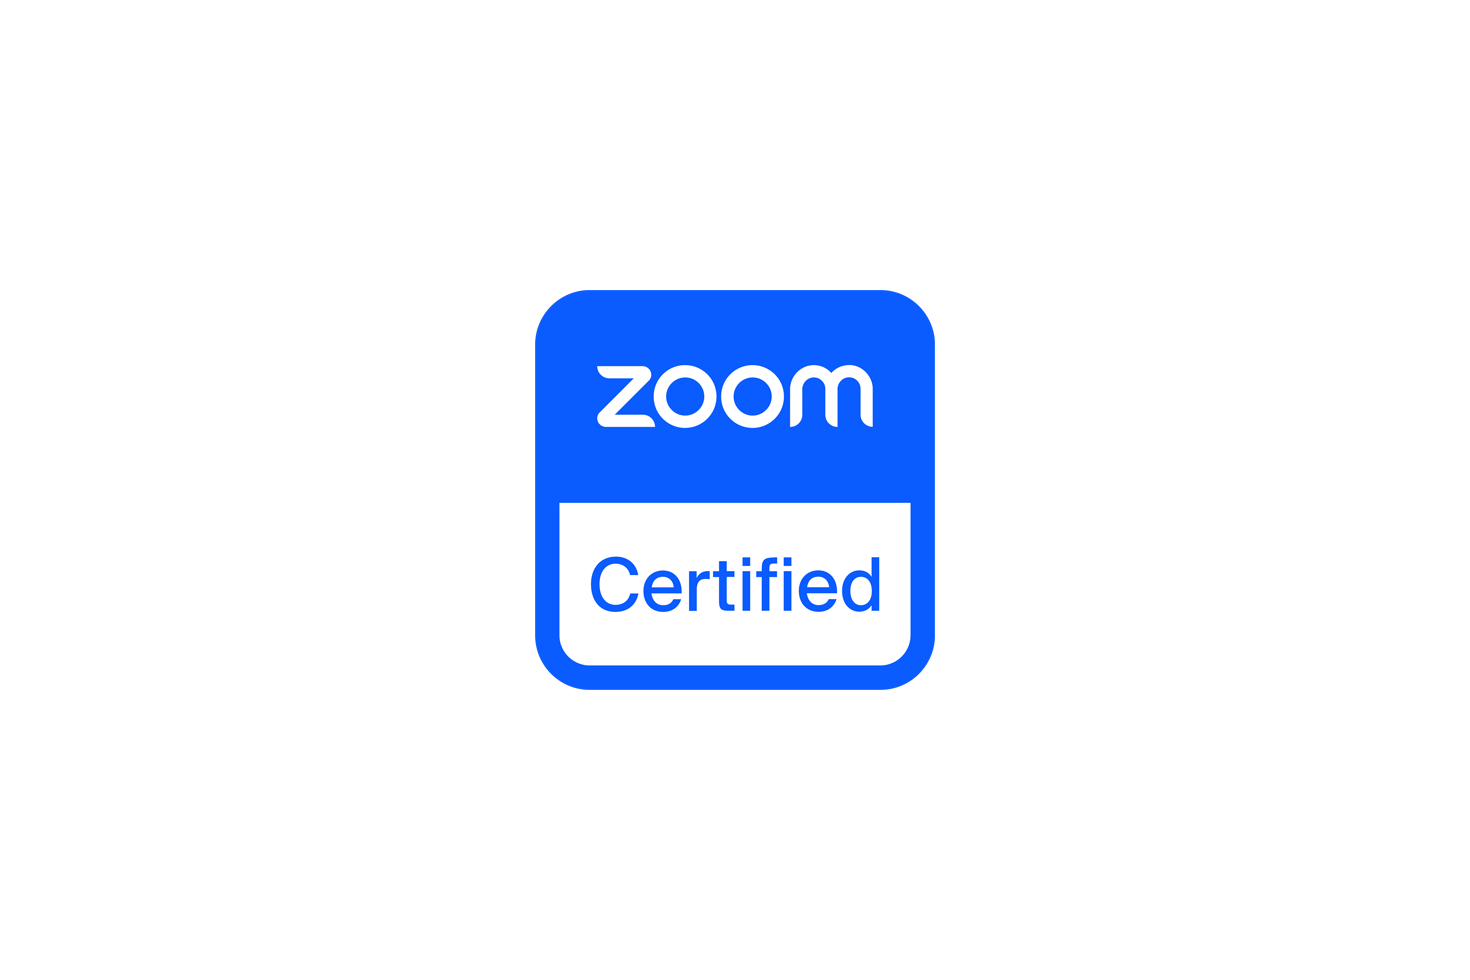 <font size="1">Zoom certified</font>